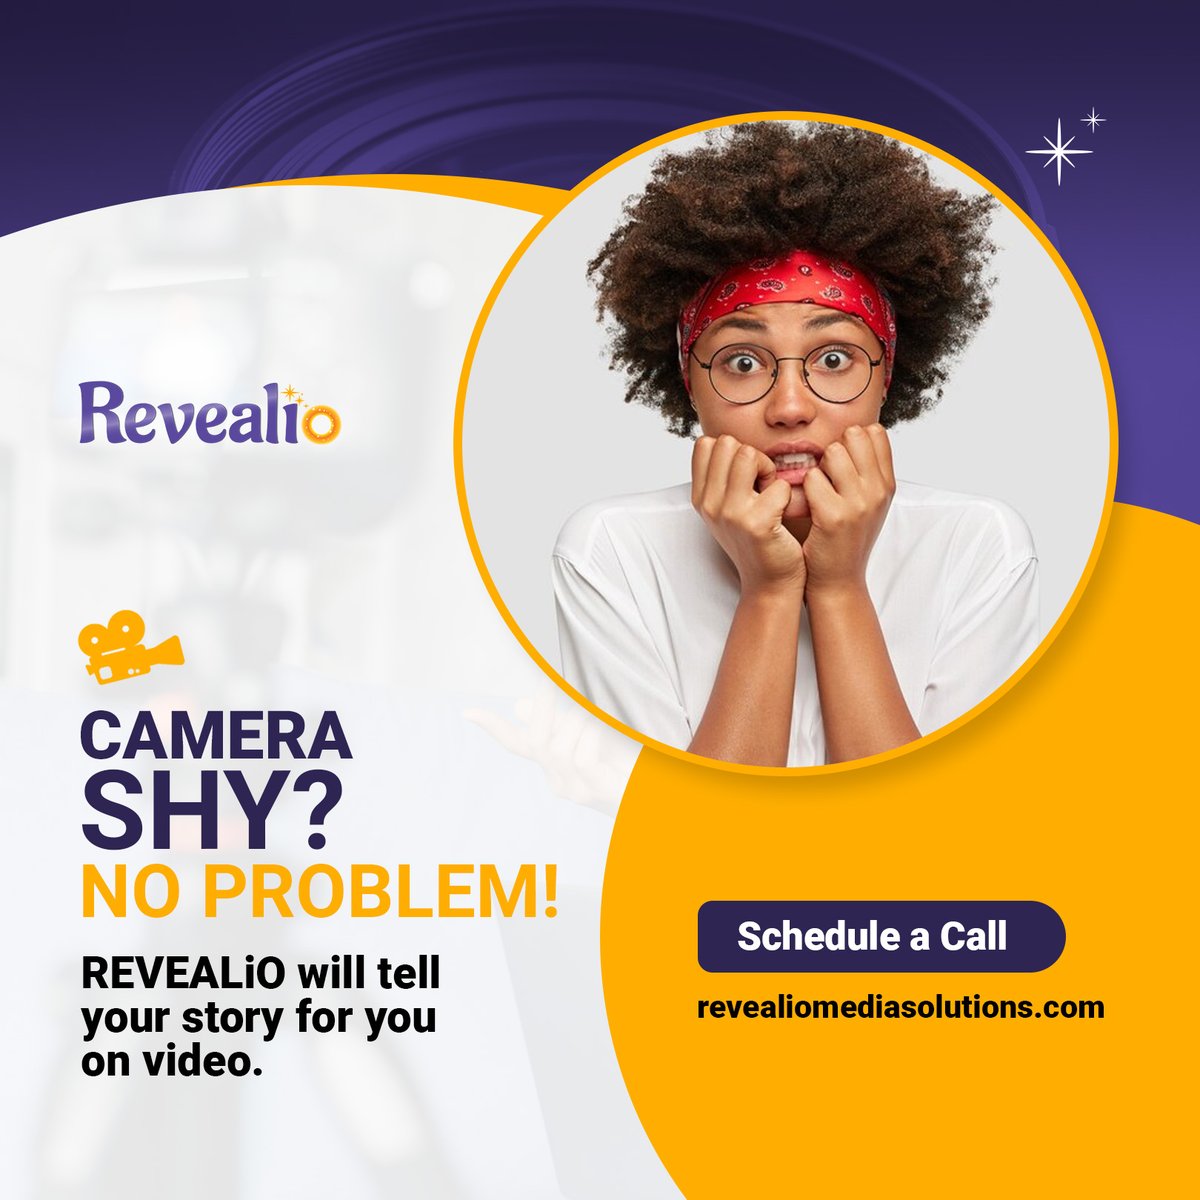 REVEALiO is here to help you and tell your story to the world. Contact us.

#video #story #videostorytelling #videomarketing #camerashy #shortformvideo #leadgeneration #valueproposition #relatability #smallbusinessvideo #nonprofitvideo #innovativestorytelling #revealio